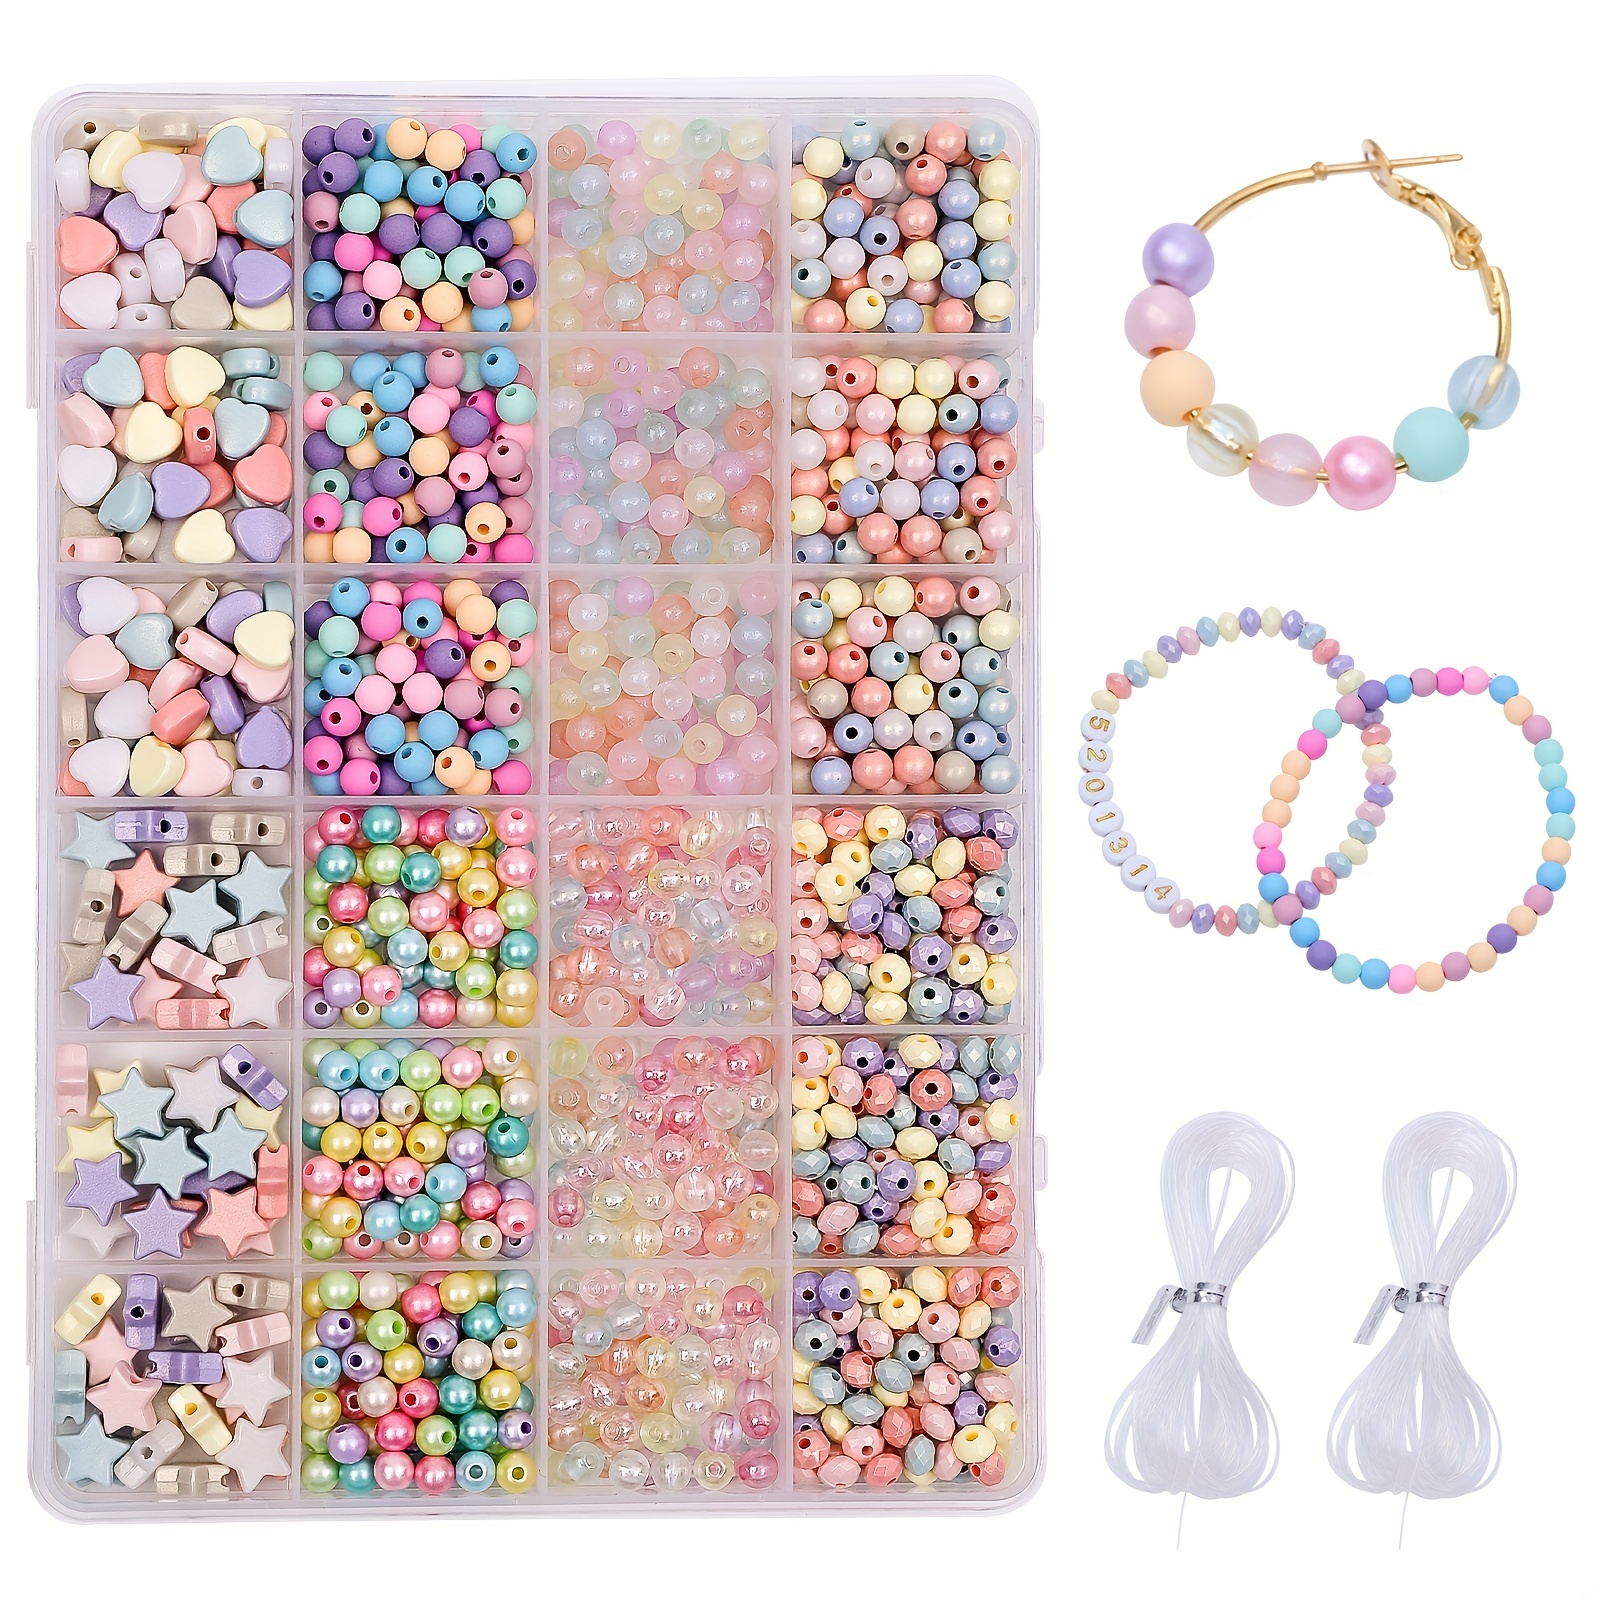 630pcs 18 Colors Acrylic Charming Beads Rainbow Round Star AB Beads  Charming Heart Beads for Jewelry Making Bracelets Crafts